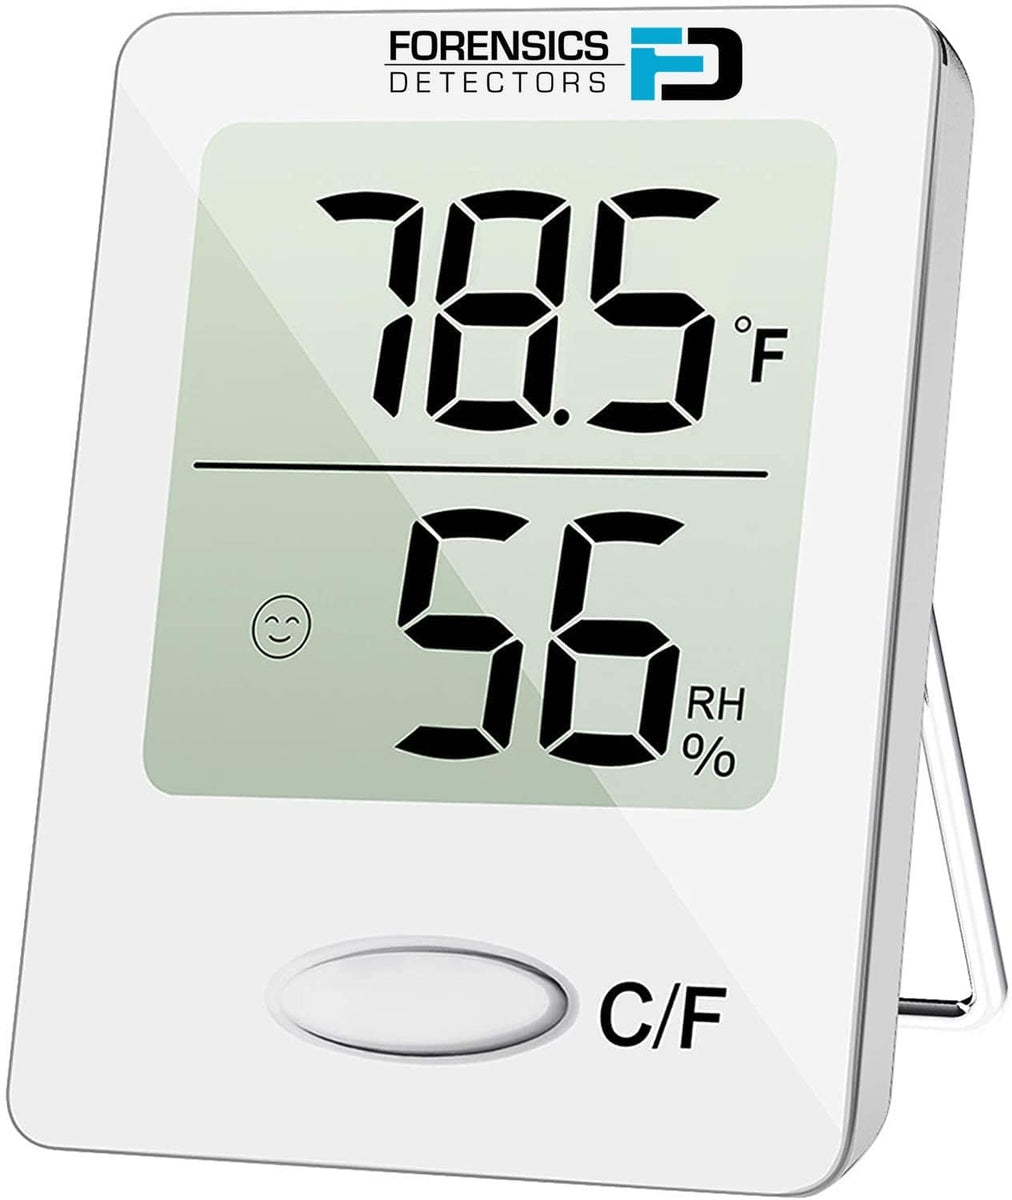 Hanging Thermometer Wall mounted Temperature Monitor Indoor